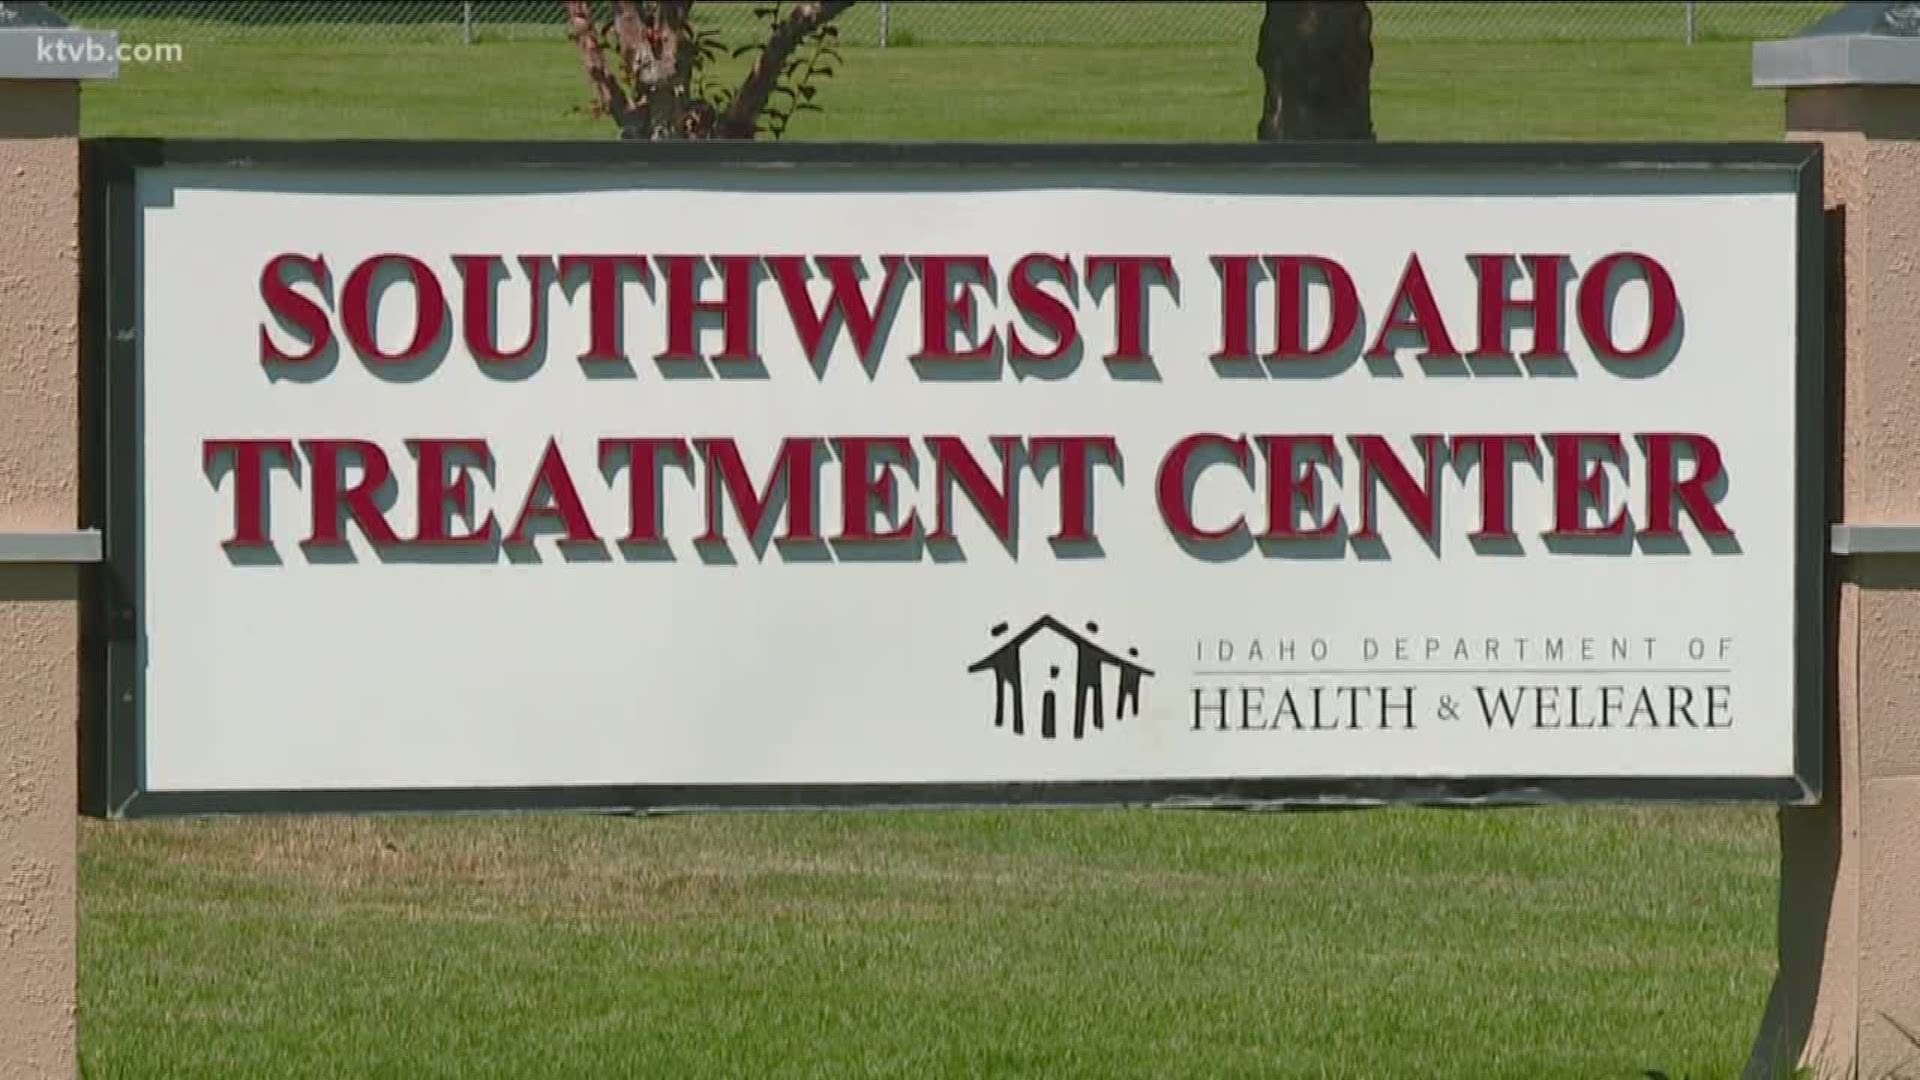 Relatives say there has been "abuse, neglect, illegal restraint and humiliation" at the Southwest Idaho Treatment Center in Nampa.